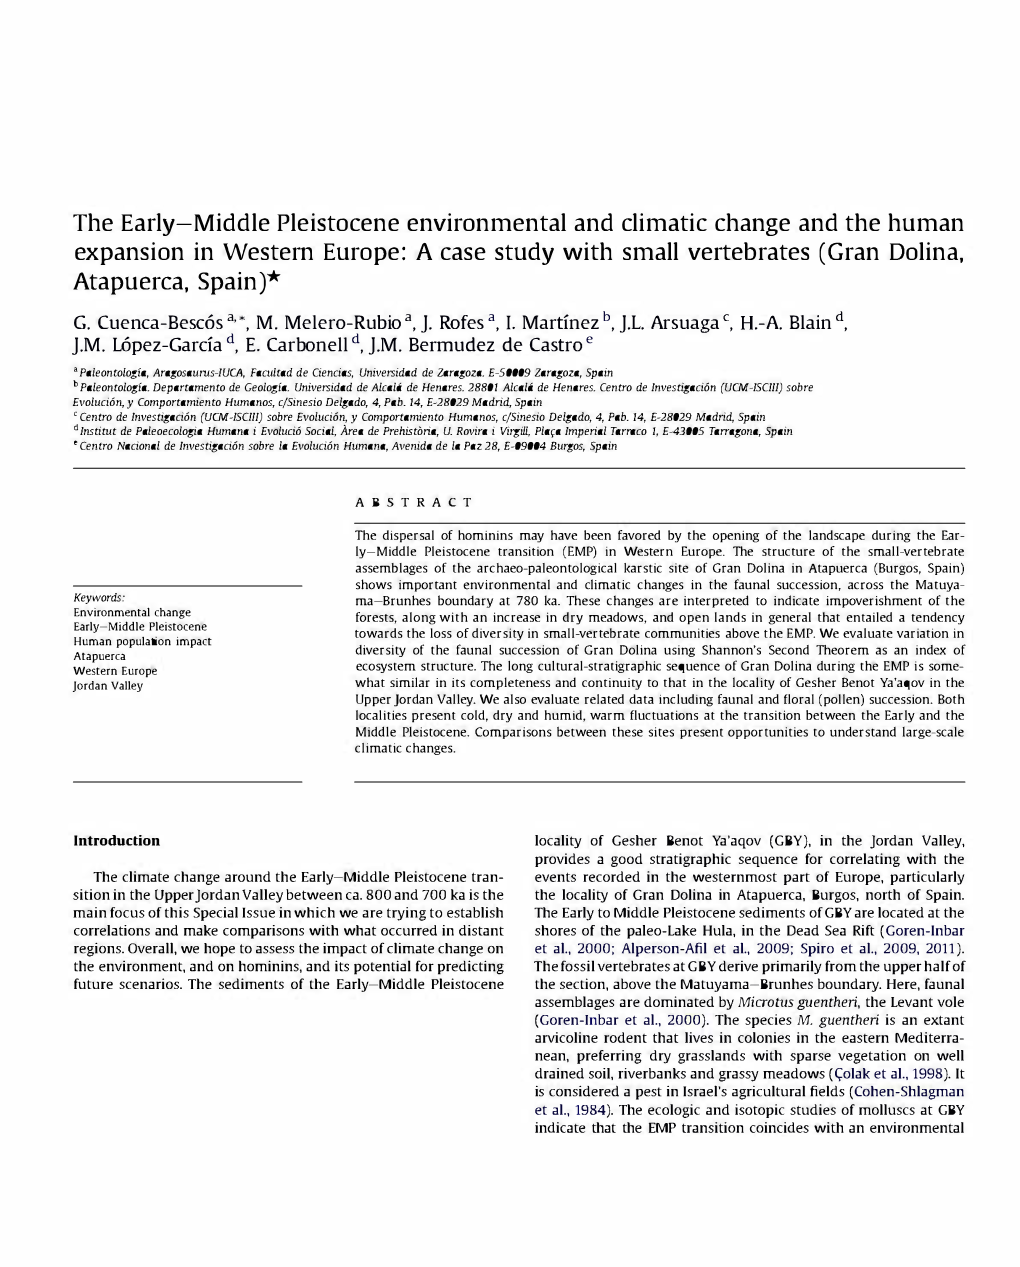 The Early-Middle Pleistocene Environmental and Climatic Change